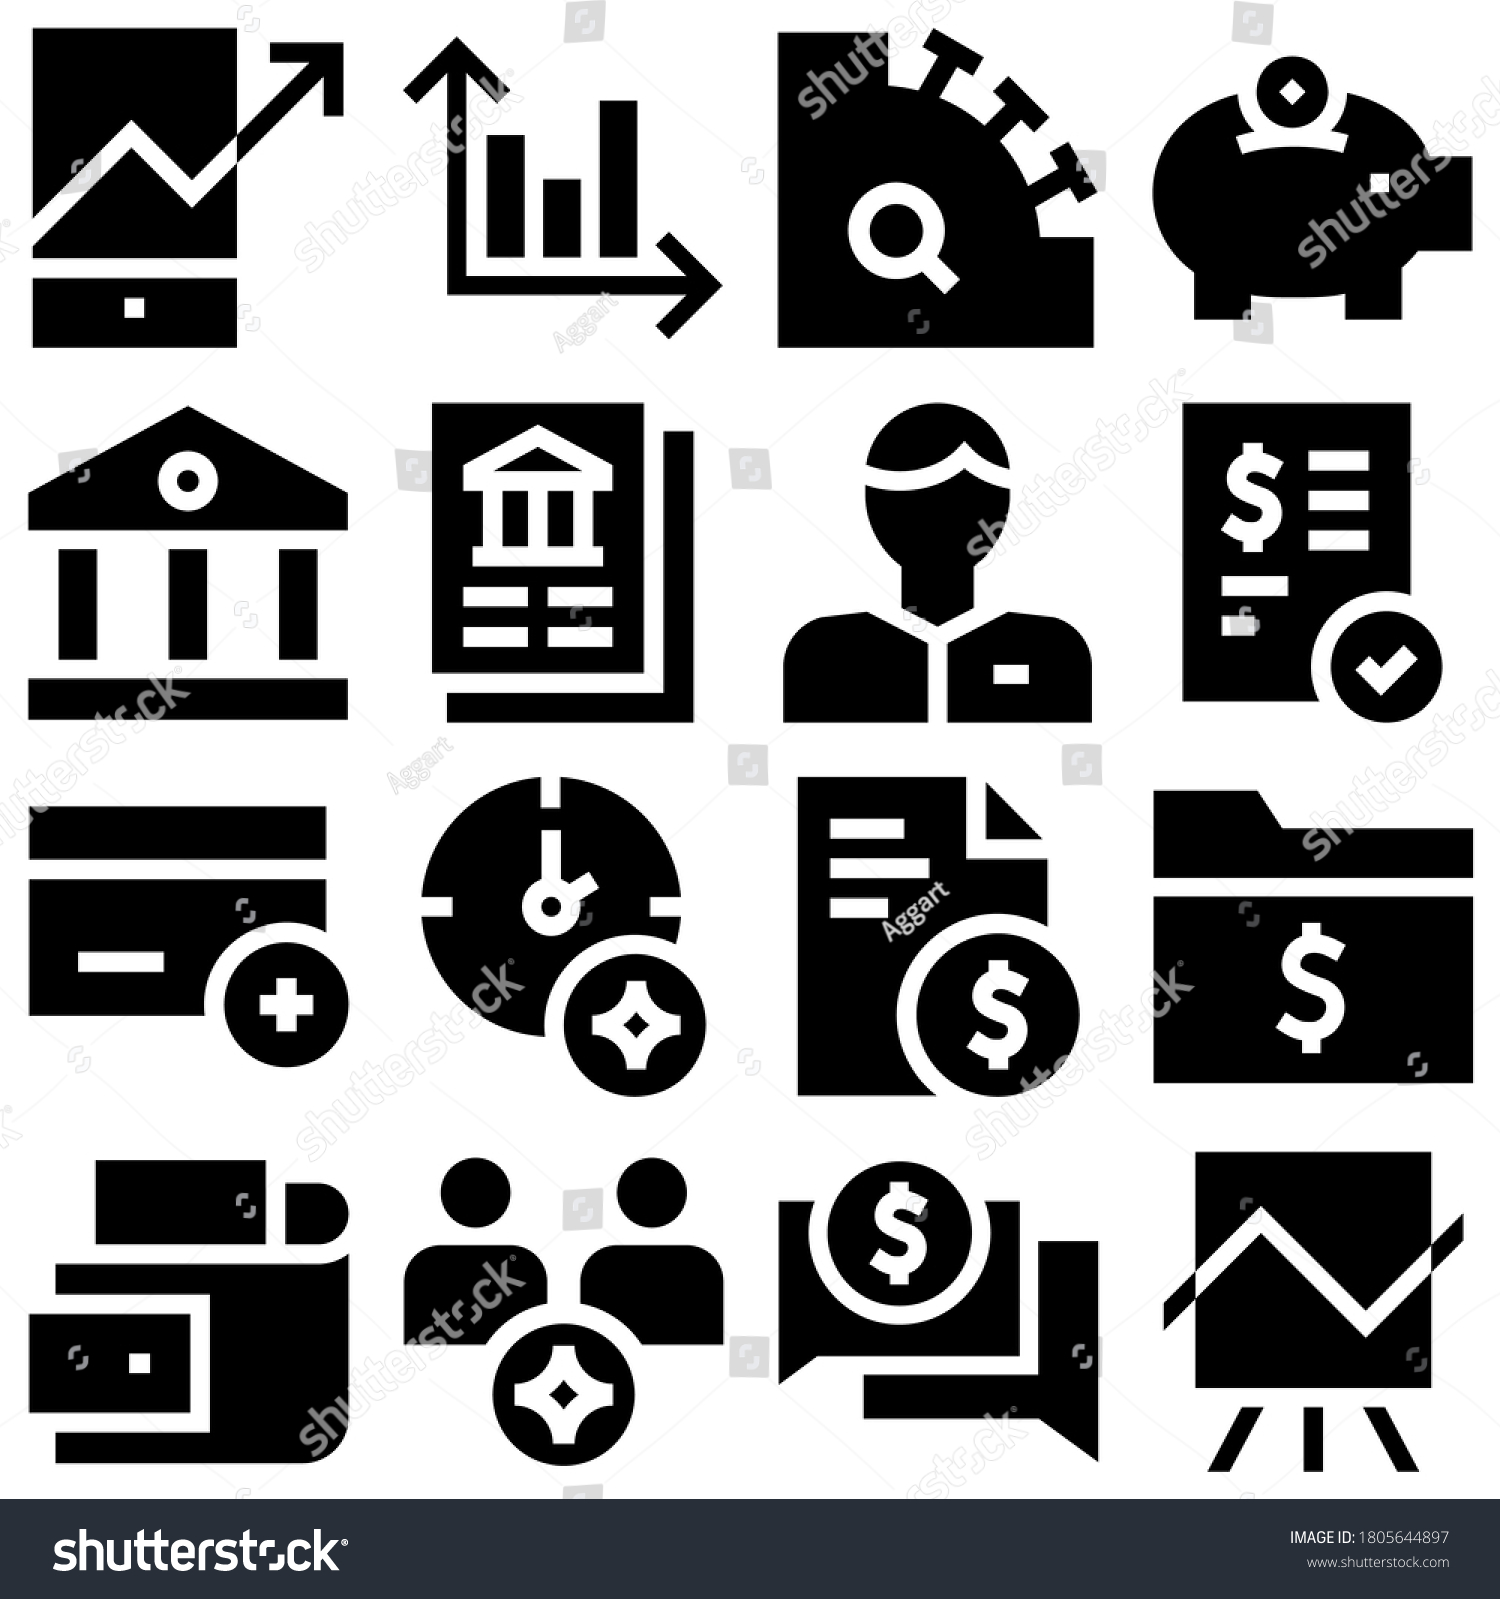 SVG of investment, Tax and finance icons vector set. Taxation and accounting, investment, loans, money savings, payment services, growth, interest, payment and business illustration svg